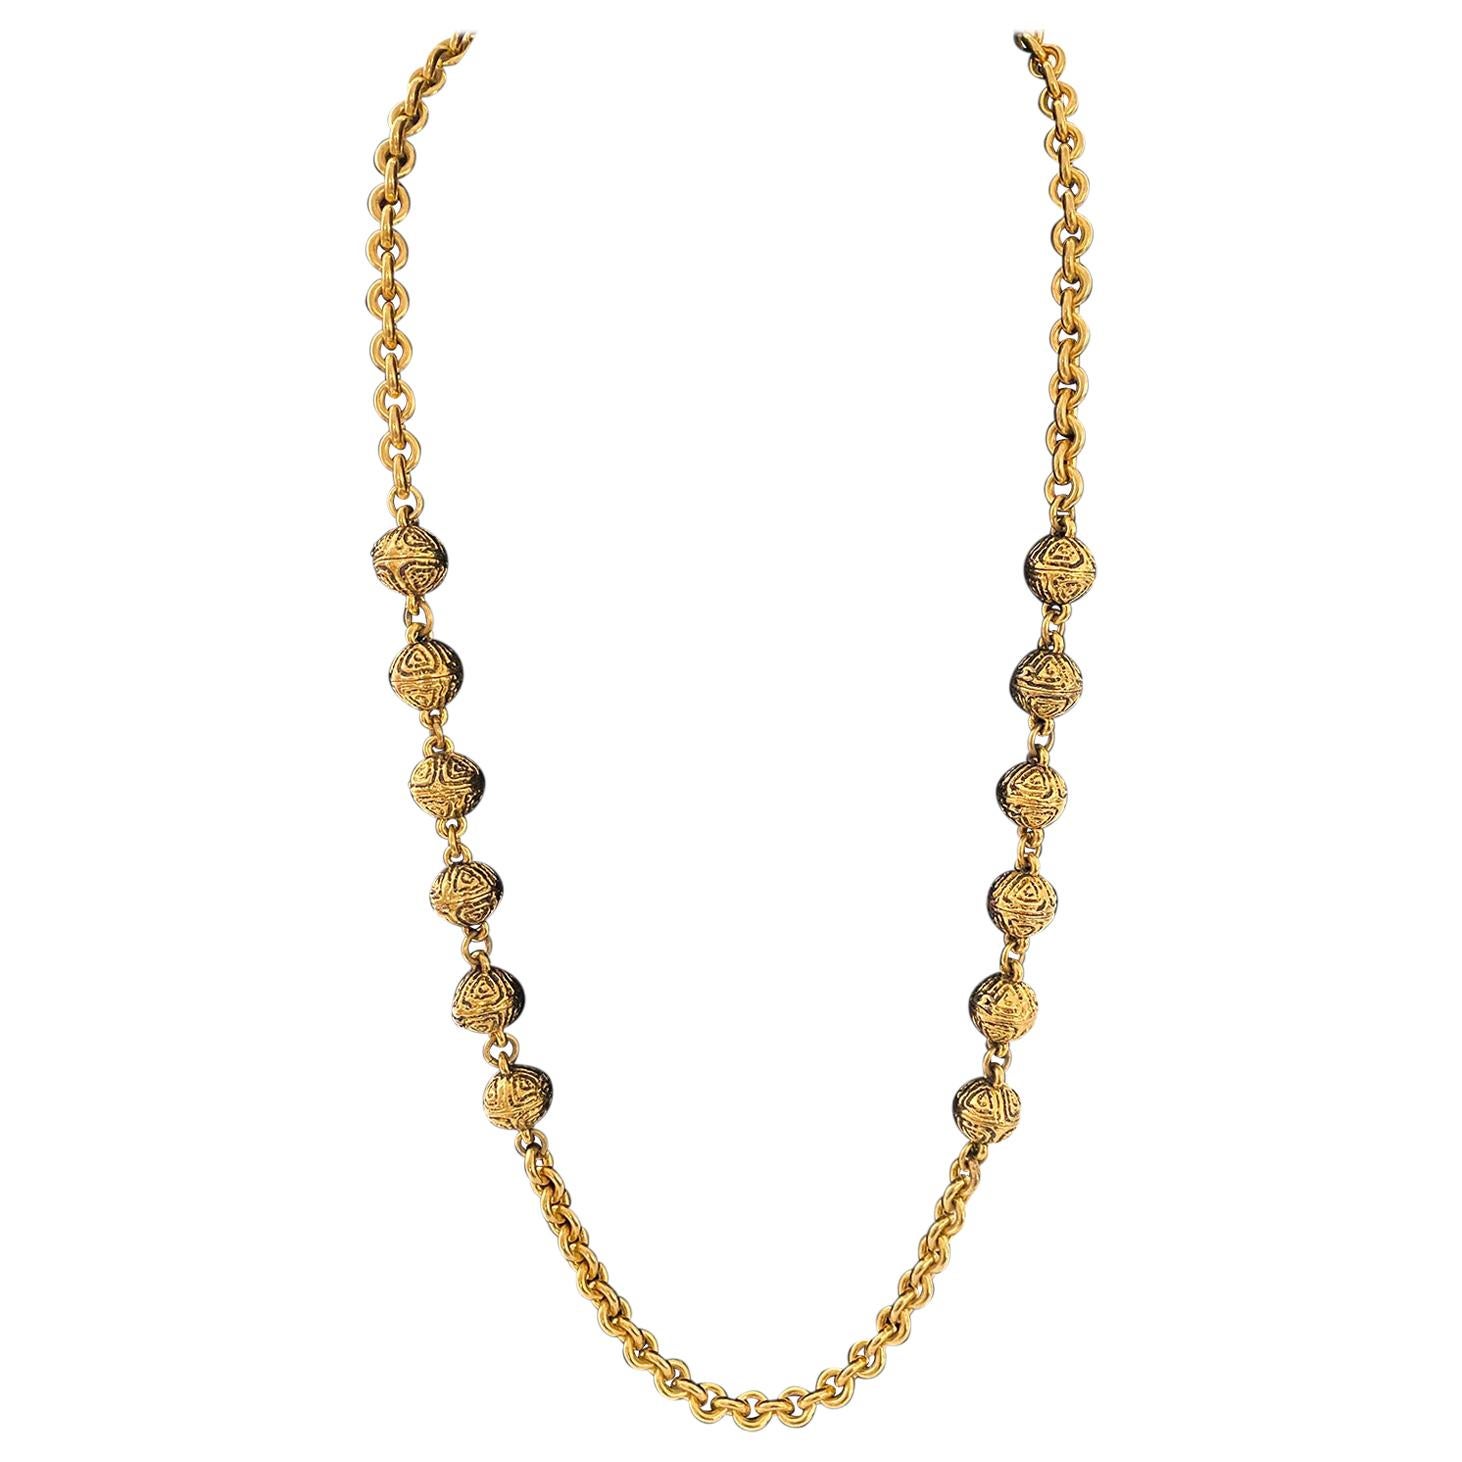 1985 Chanel Gold Tone Chain Link Necklace with Gilded Beads 